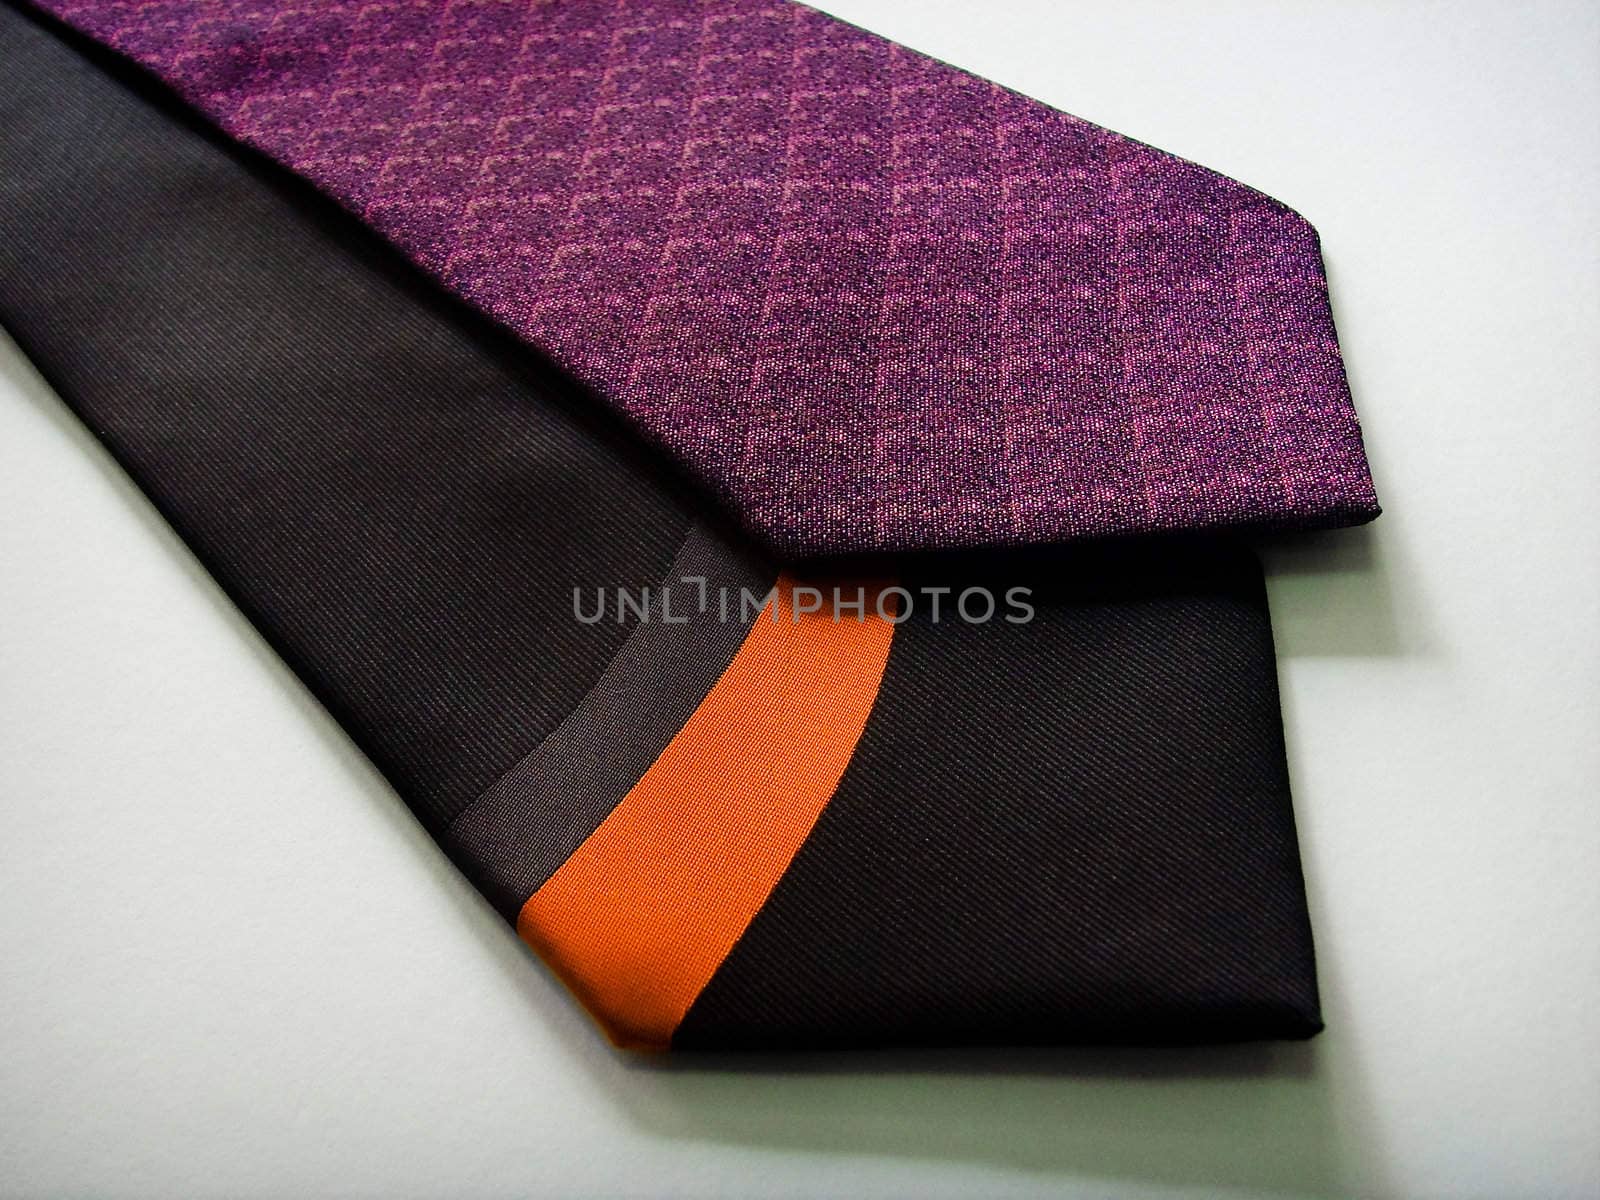 A black and a purple tie on a white background